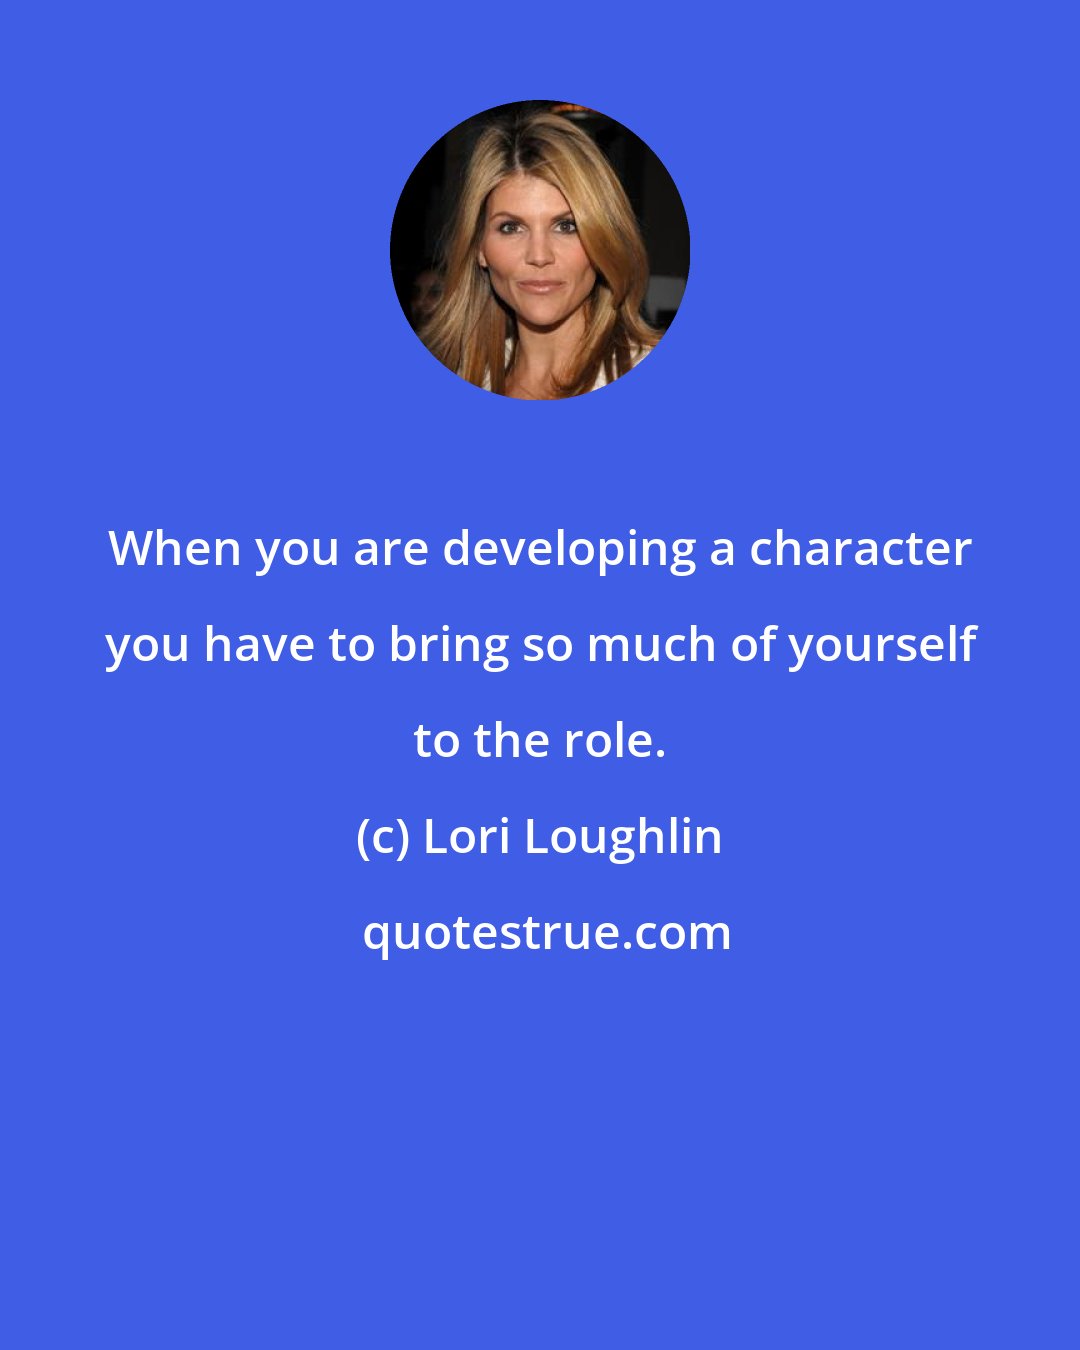 Lori Loughlin: When you are developing a character you have to bring so much of yourself to the role.